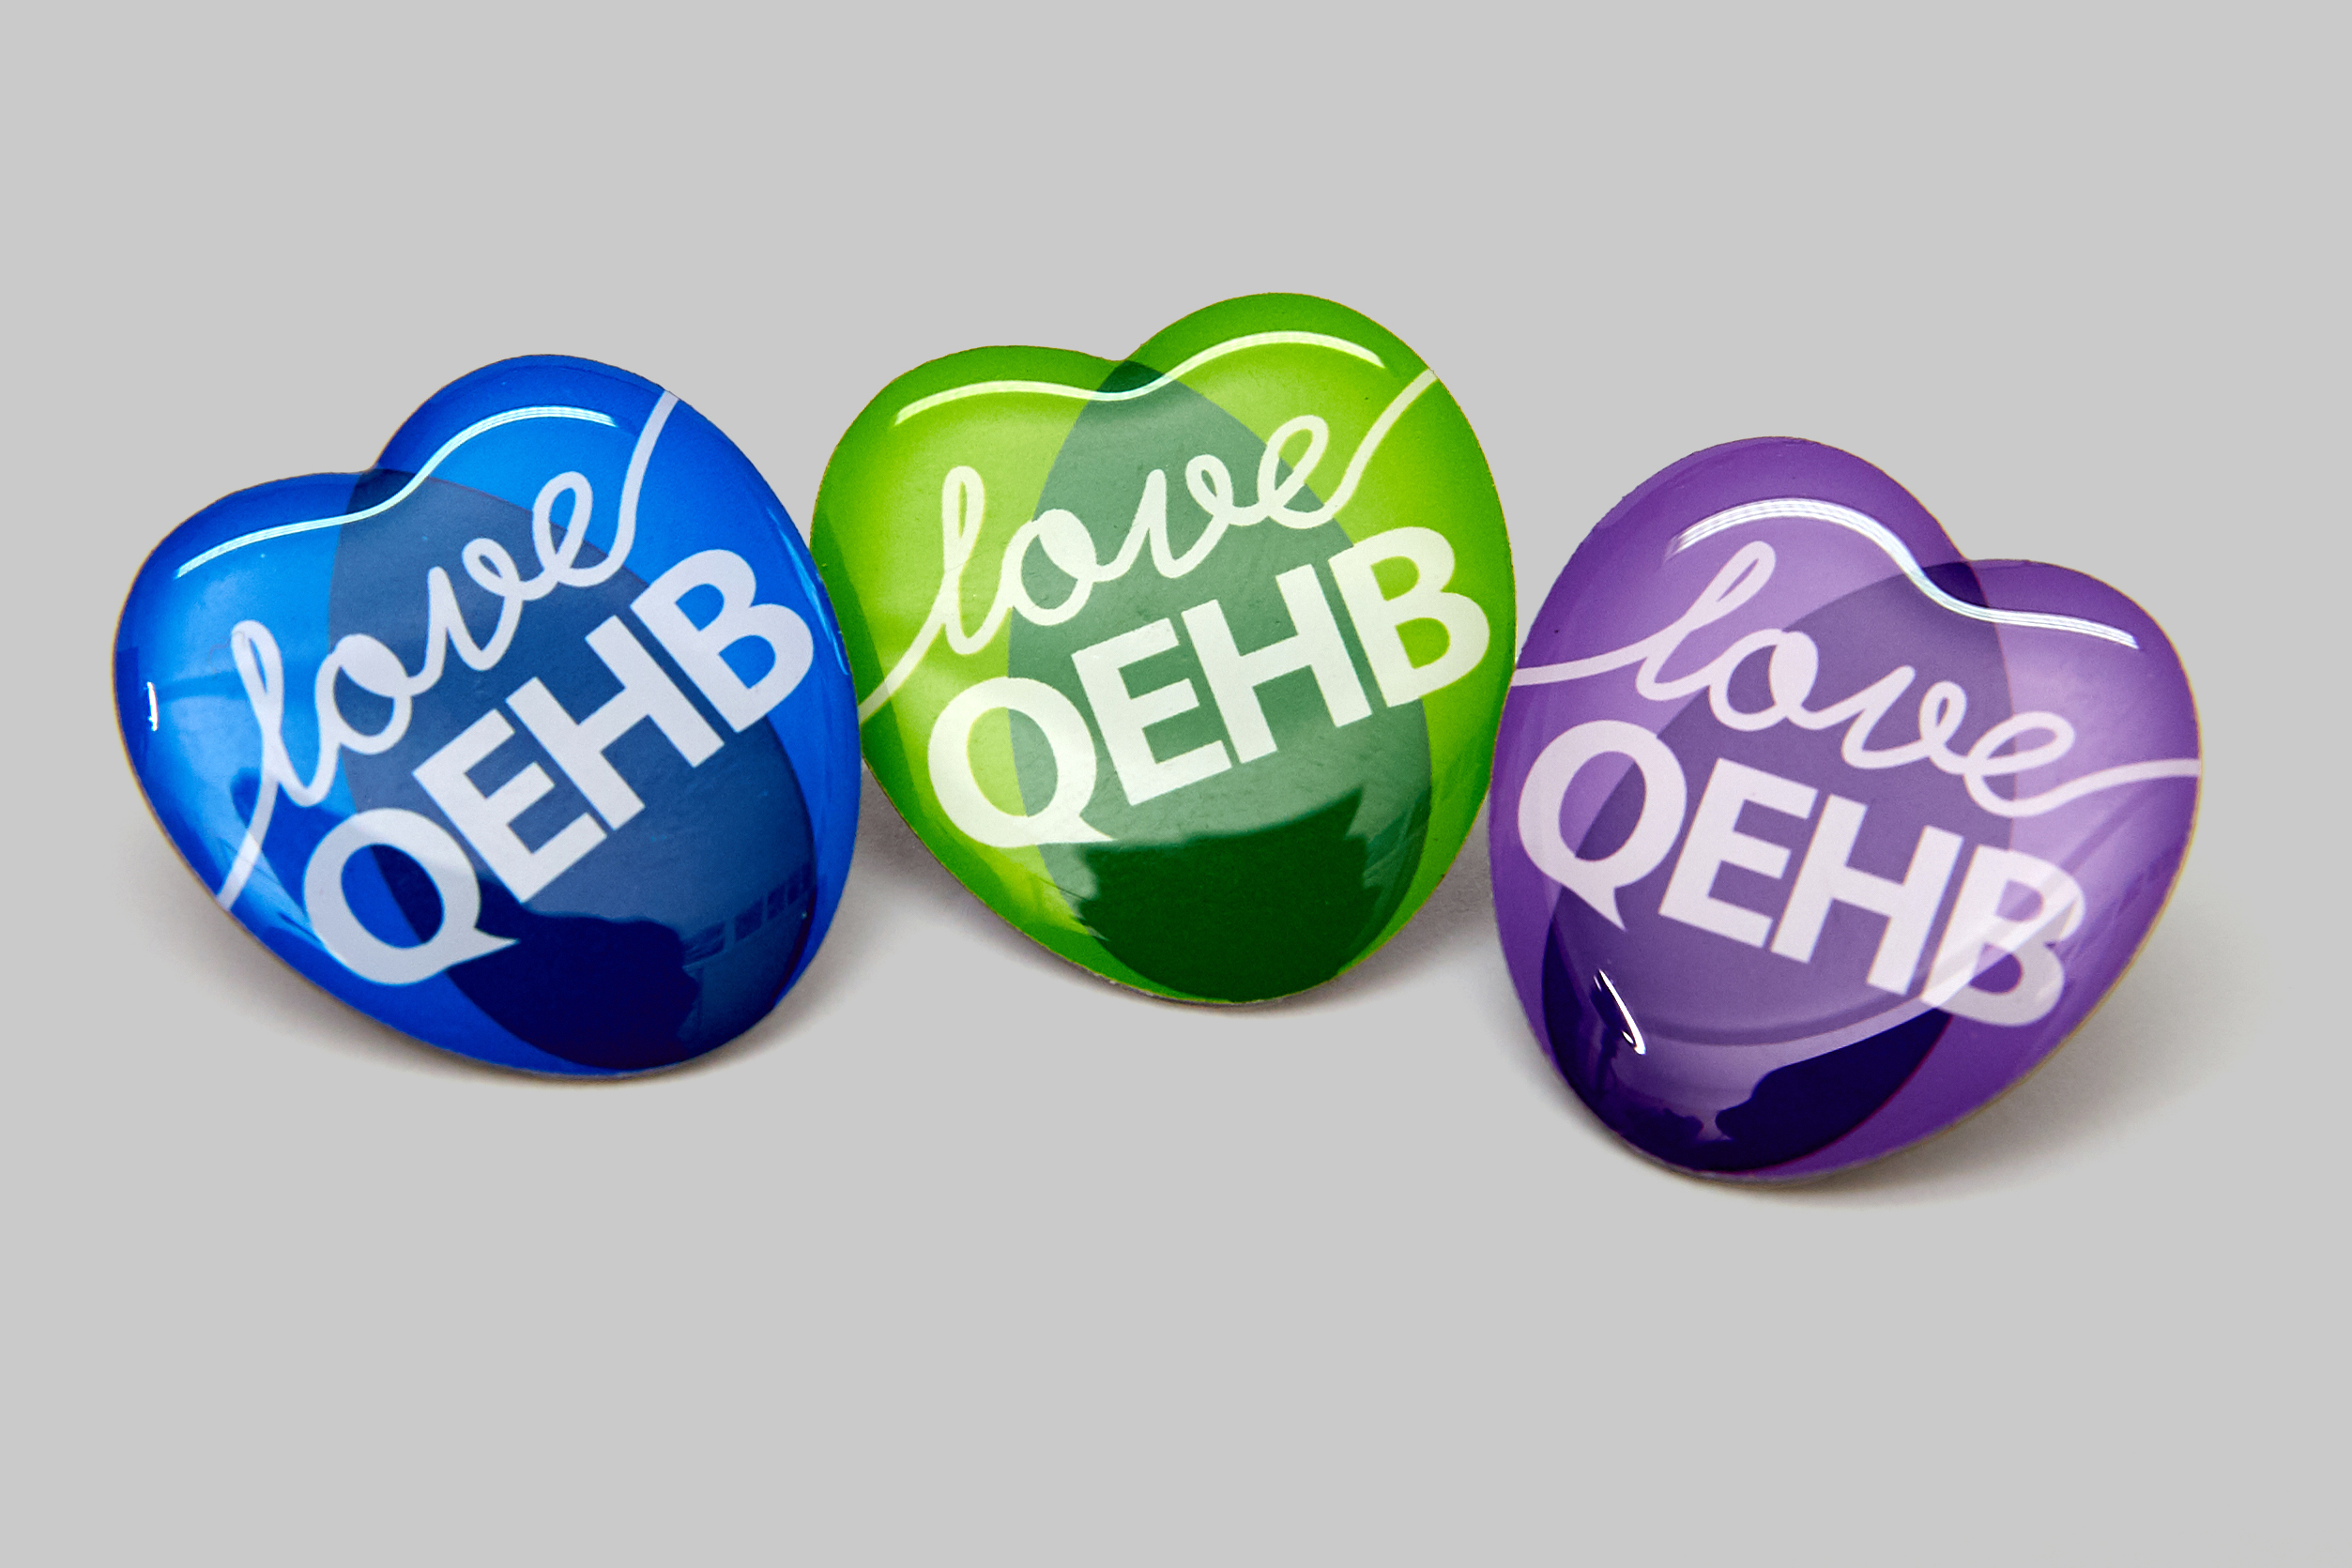 Three heart-shaped pin badges are arranged on a neutral grey background. The words 'Love QEHB' are overlaid in white on the blue-, purple- and green-coloured badges.